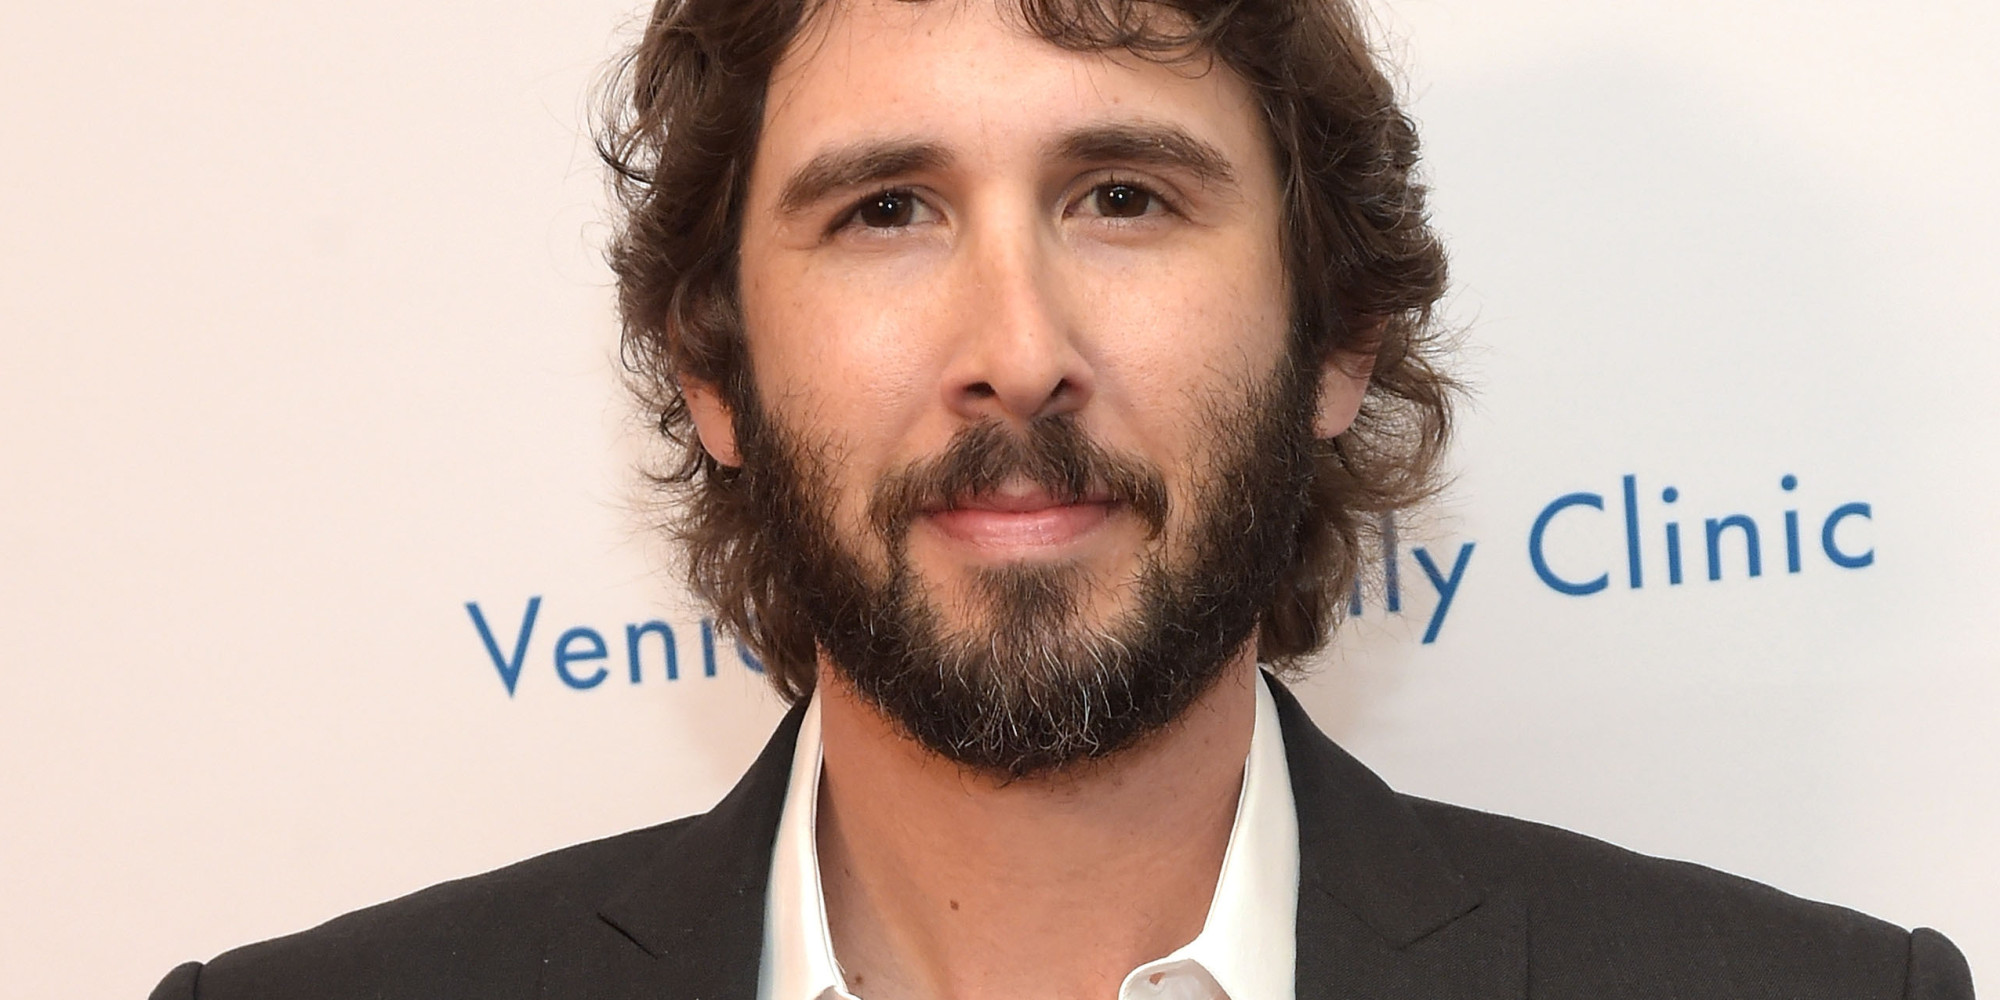 Josh Groban TalksBear Fans And Rumors About His Sexuality HuffPost